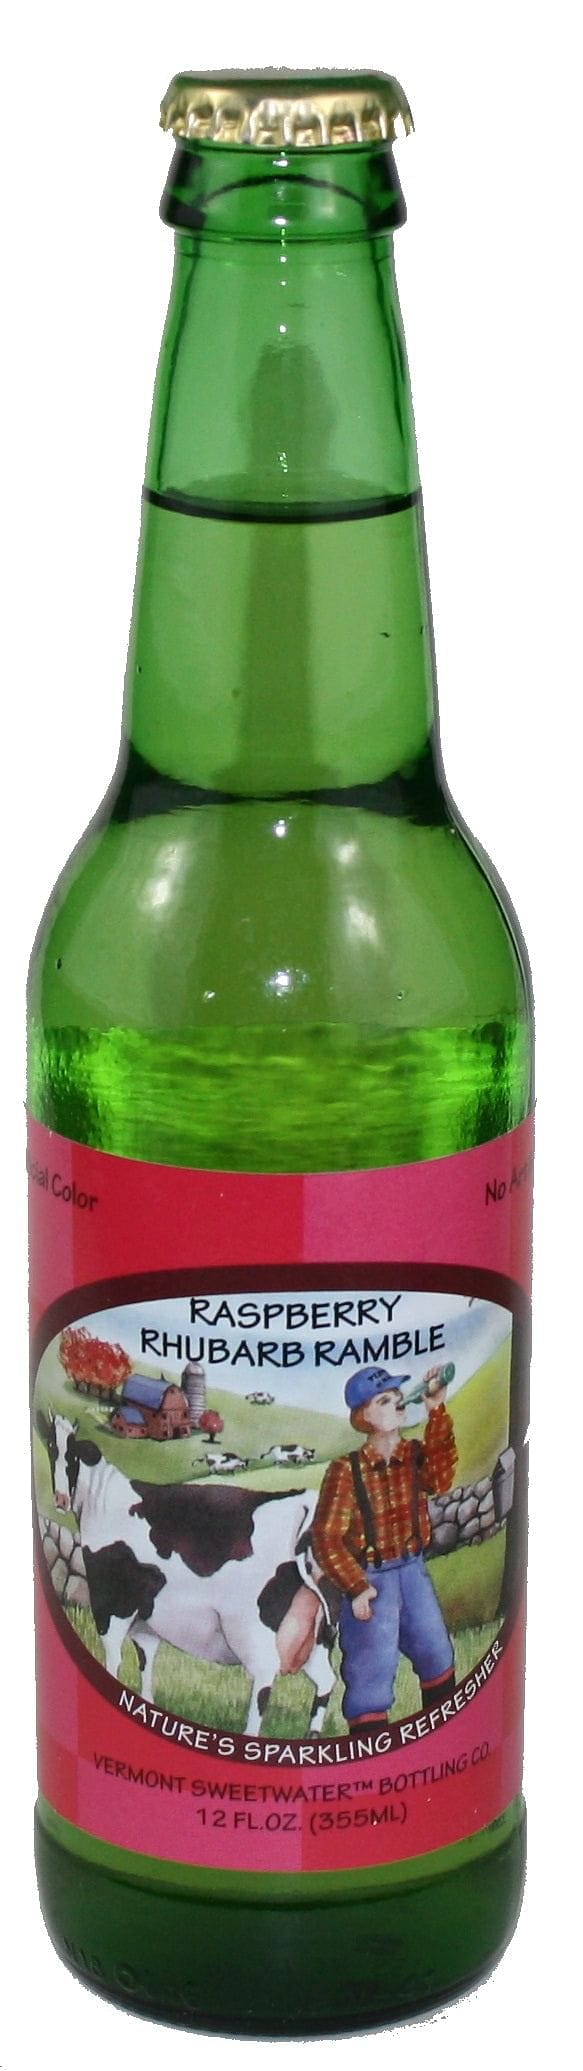 Vermont Sweetwater All Natural Glass Bottle Soda (Raspberry Rhubarb Ramble) - Shelburne Country Store